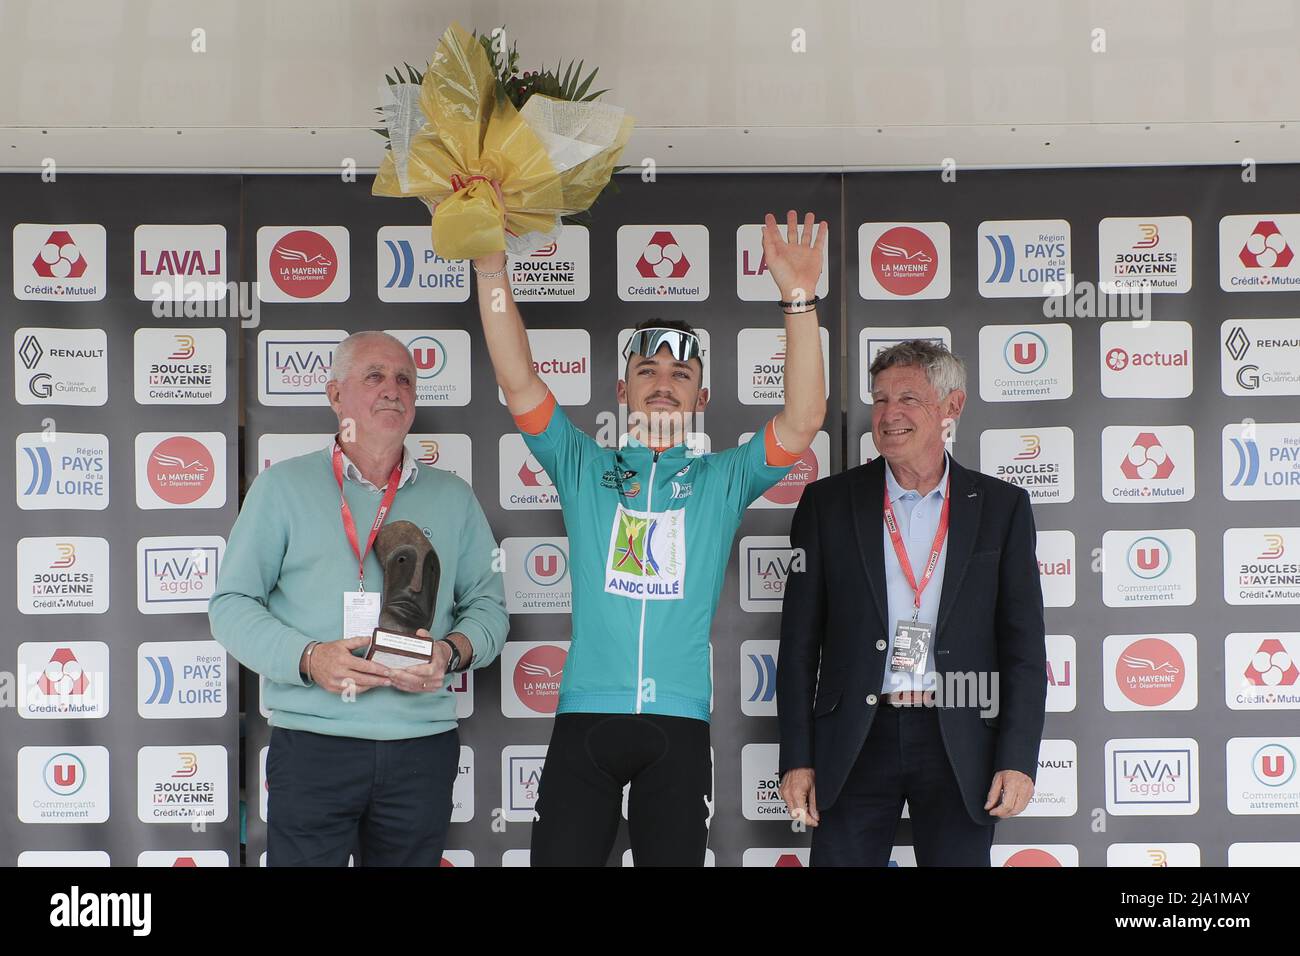 Andouille, France, May 26, 2022, Jason Tesson (FRA) team St-Michel-Auber 93 - Continental - dossard 171, 24 ans, (Vainqueur d etape - Vainqueur classement general - Vainqueur classement aux points - Vainqueur meilleur espoir) during the Boucles de la Mayenne 2022, UCI ProSeries cycling race, Stage 1, Saint-Pierre-des-Landes > Andouille (180 Km) on May 26, 2022 in Andouille, France - Photo: Stephane Allaman/DPPI/LiveMedia Stock Photo